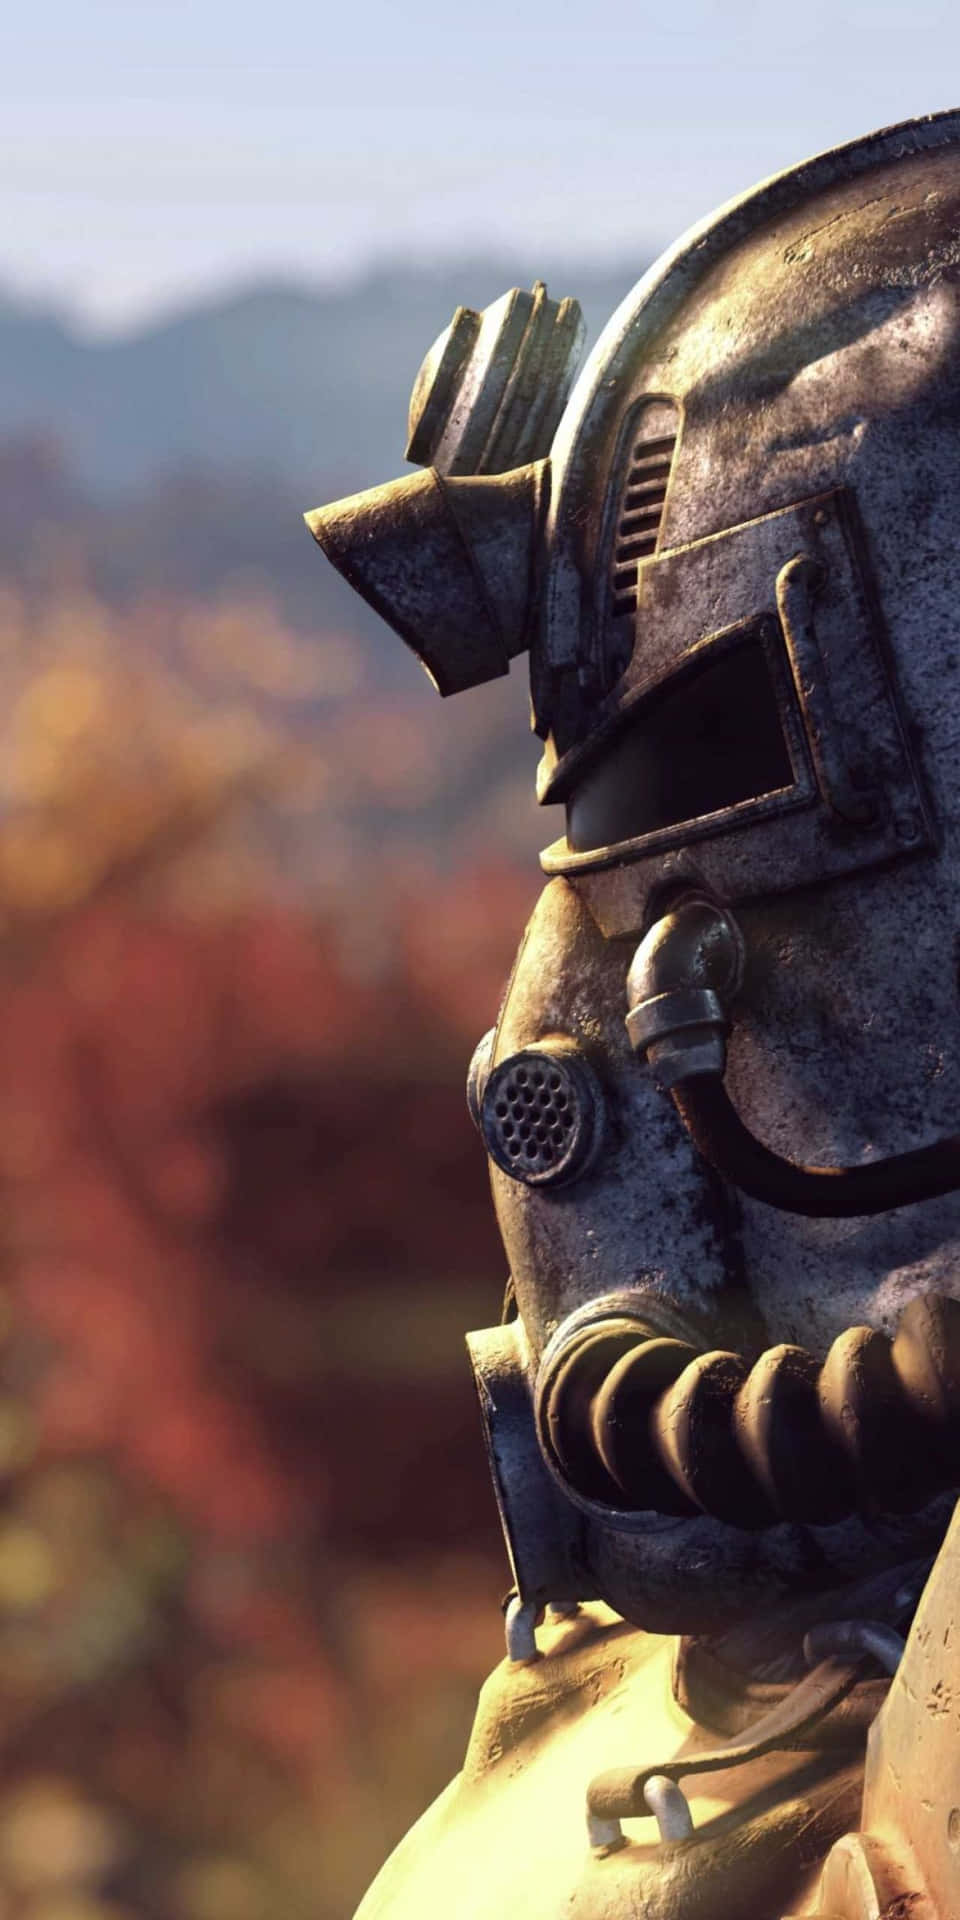 Get ready to explore the Wasteland in Fallout 76 with the Pixel 3